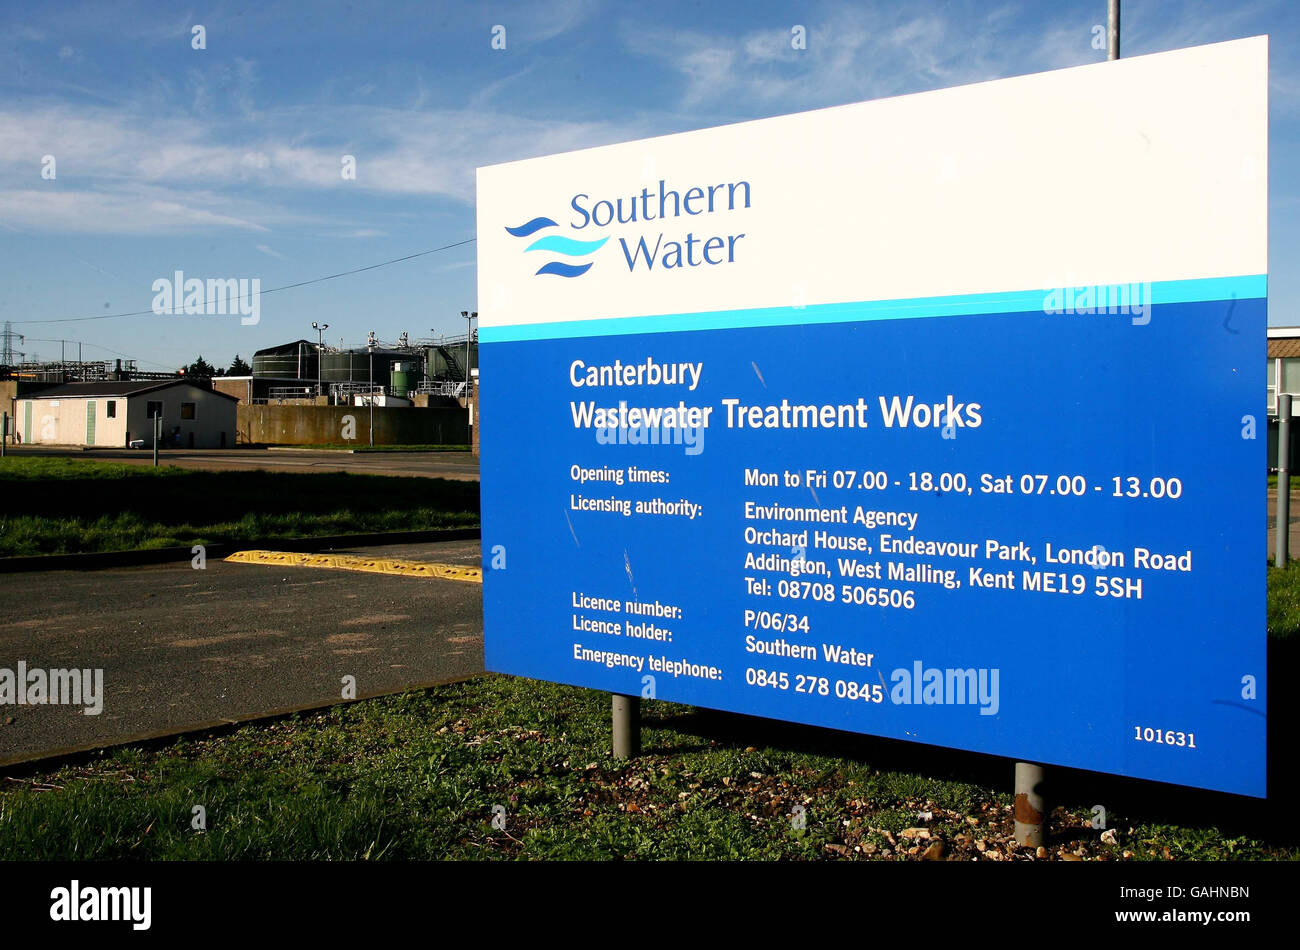 A general view of the Southern Water Canterbury Wastewater Treatment Works in Canterbury, Kent. The company has been fined 20.3 million for poor service and deliberately misreporting information, Ofwat said today. Stock Photo